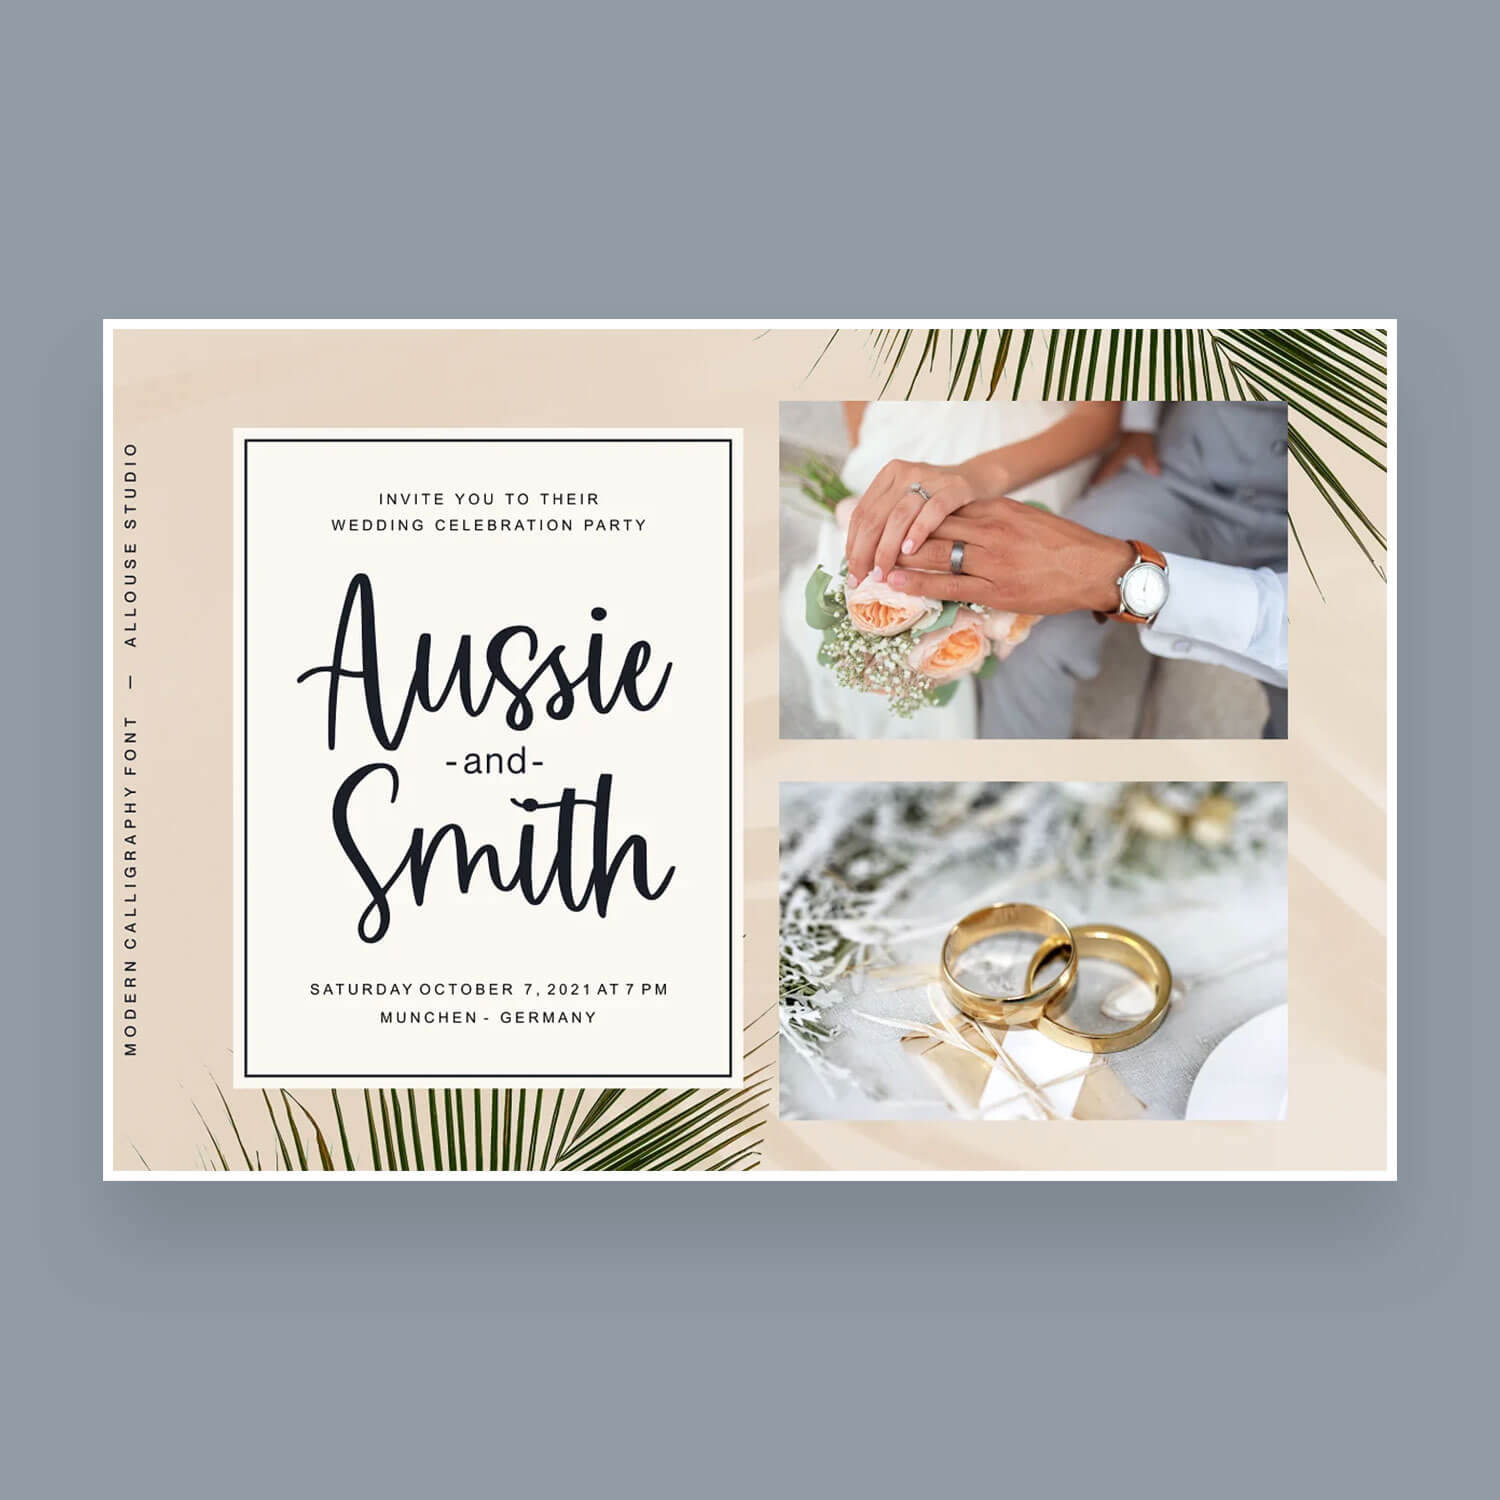 A collage of two wedding photos and an inscription: Augsie and Smith.